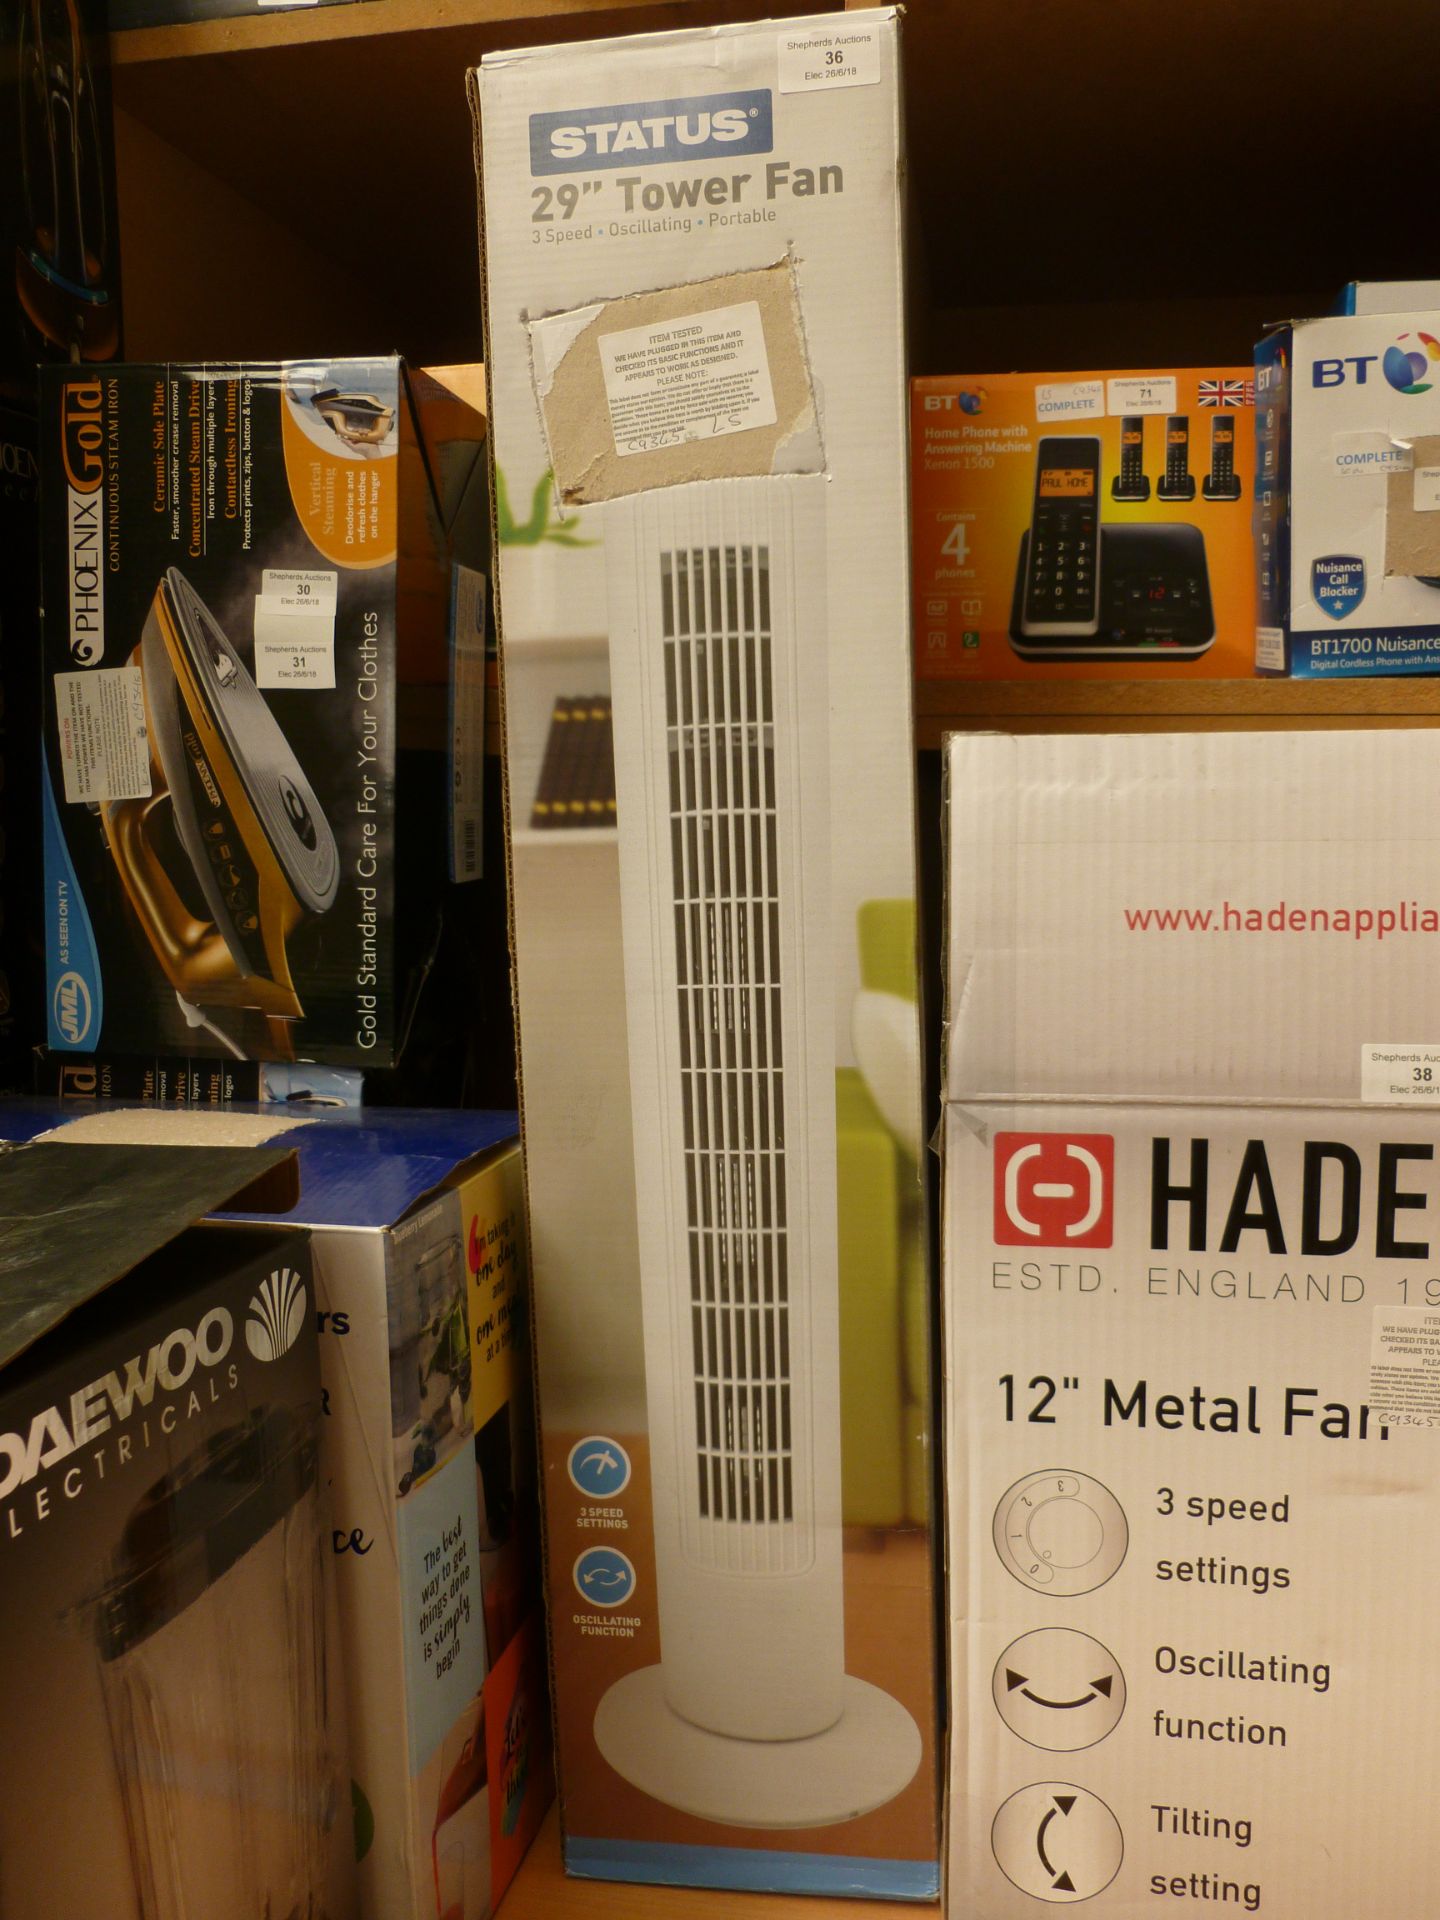 Status 29" tower fan, tested working and boxed.